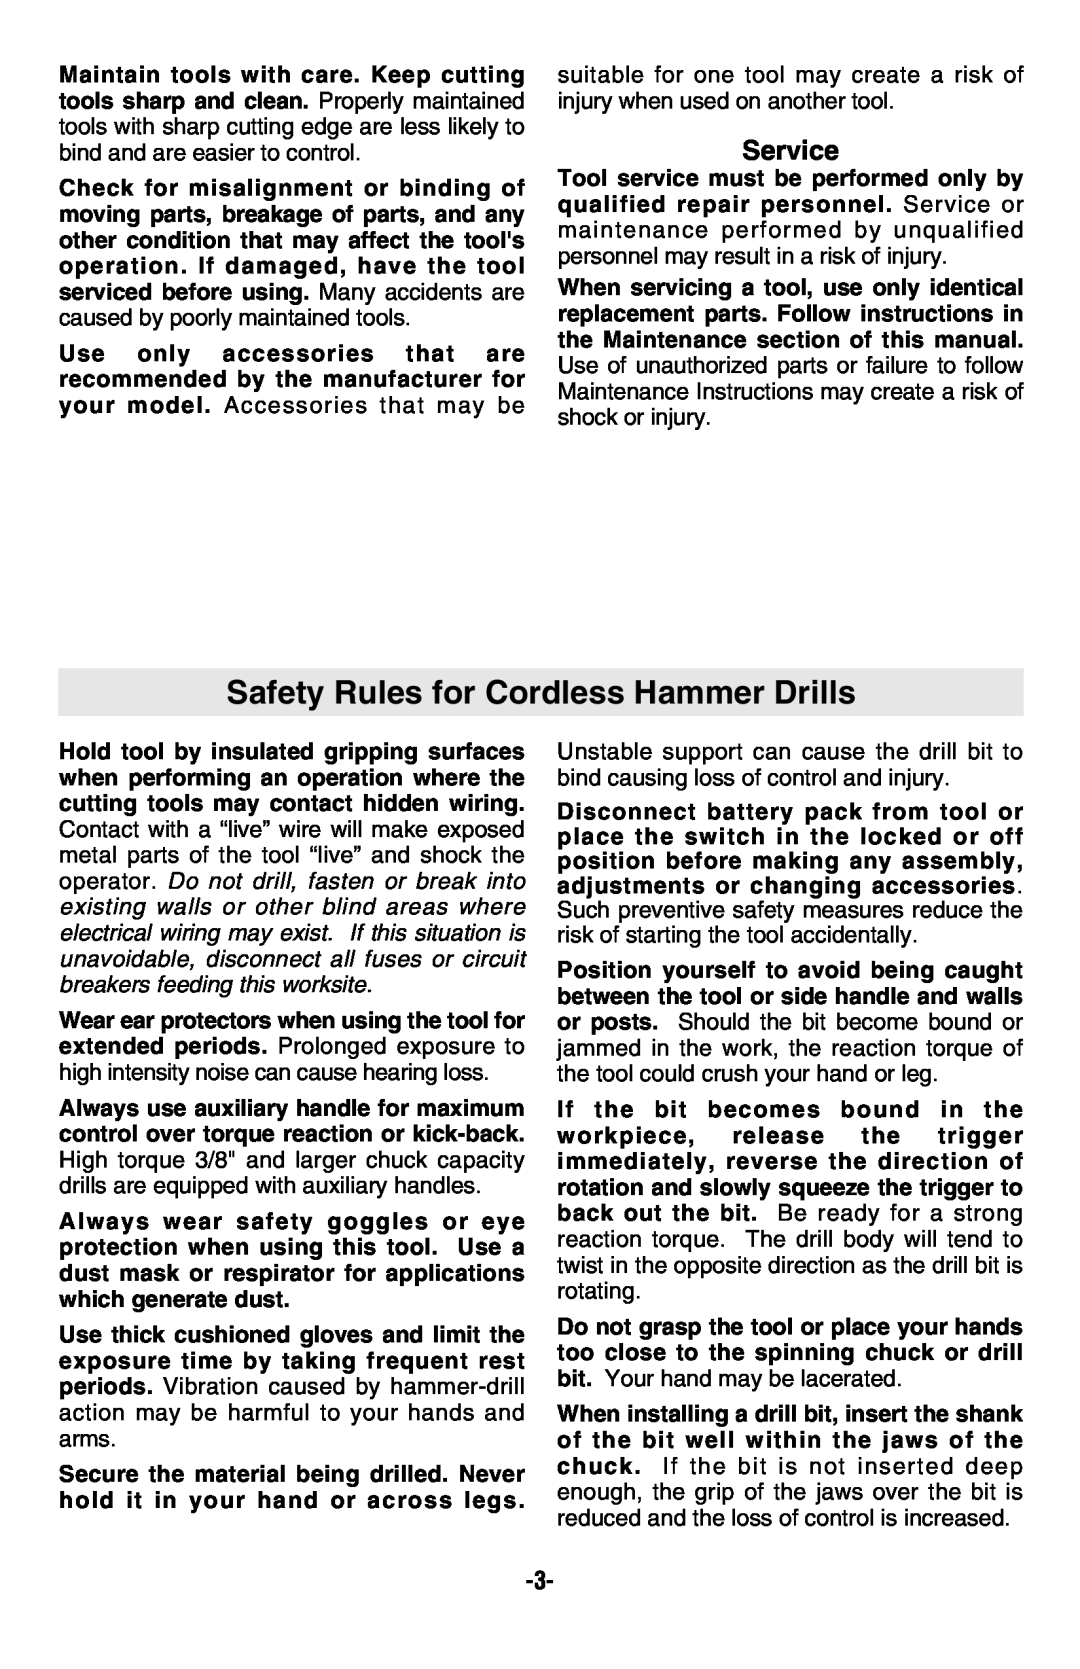 Bosch Power Tools 13614, 13618, 13624 manual Safety Rules for Cordless Hammer Drills, Service 